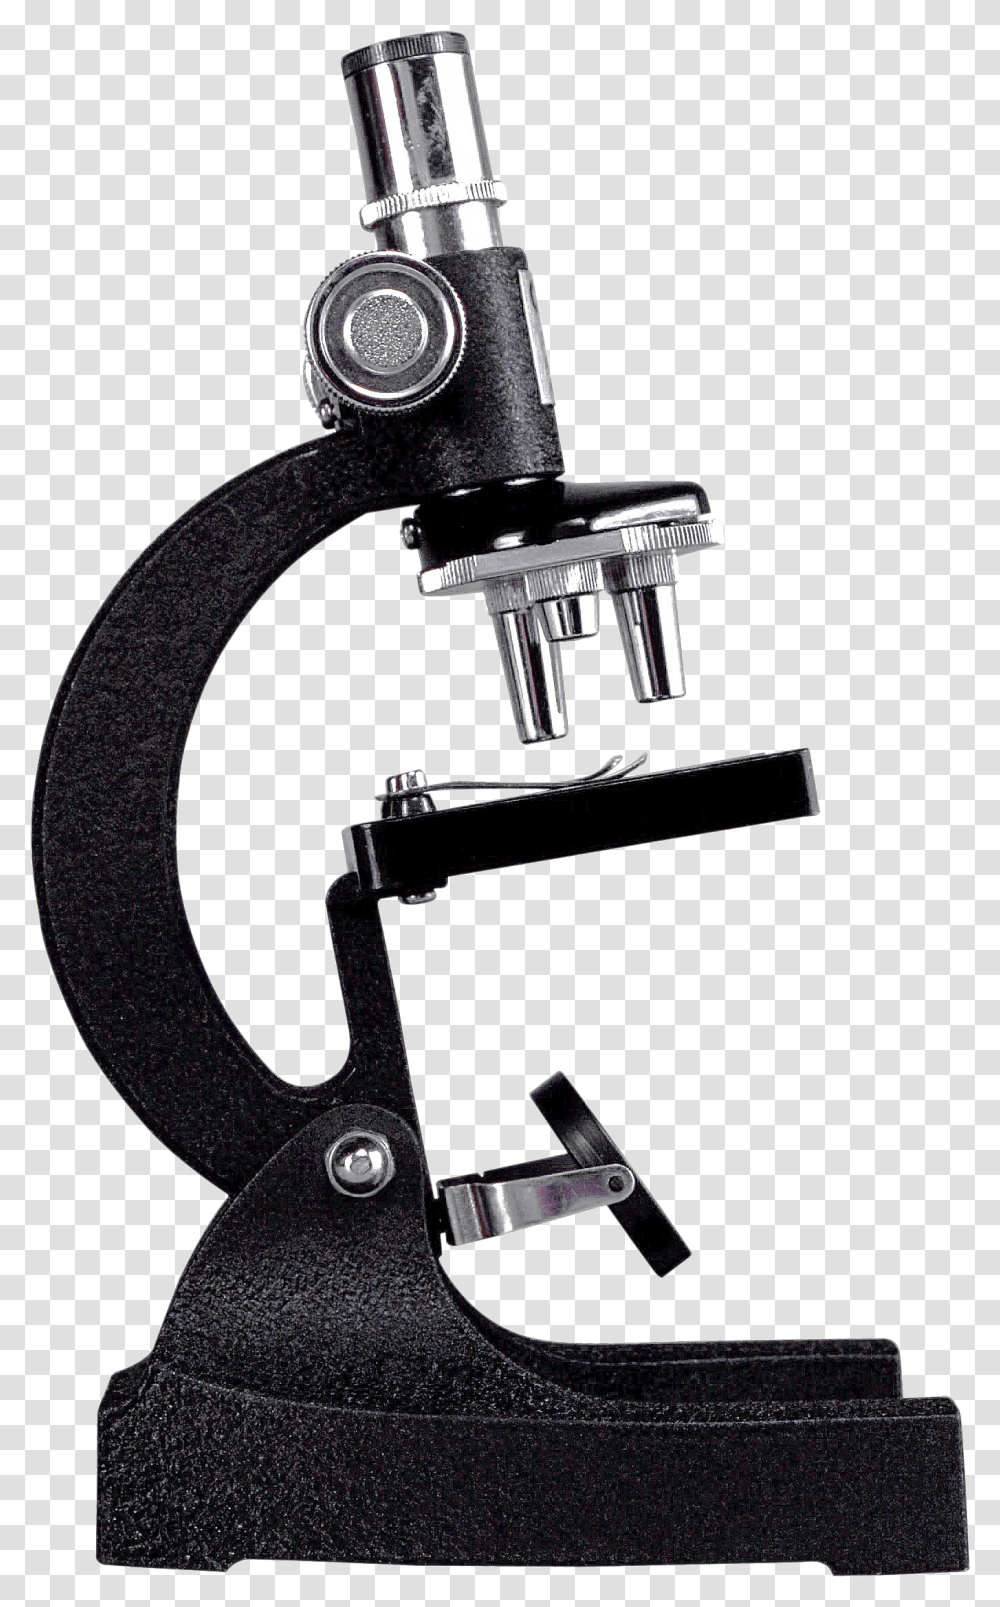 Download This High Resolution Microscope In Microscope Transparent Png